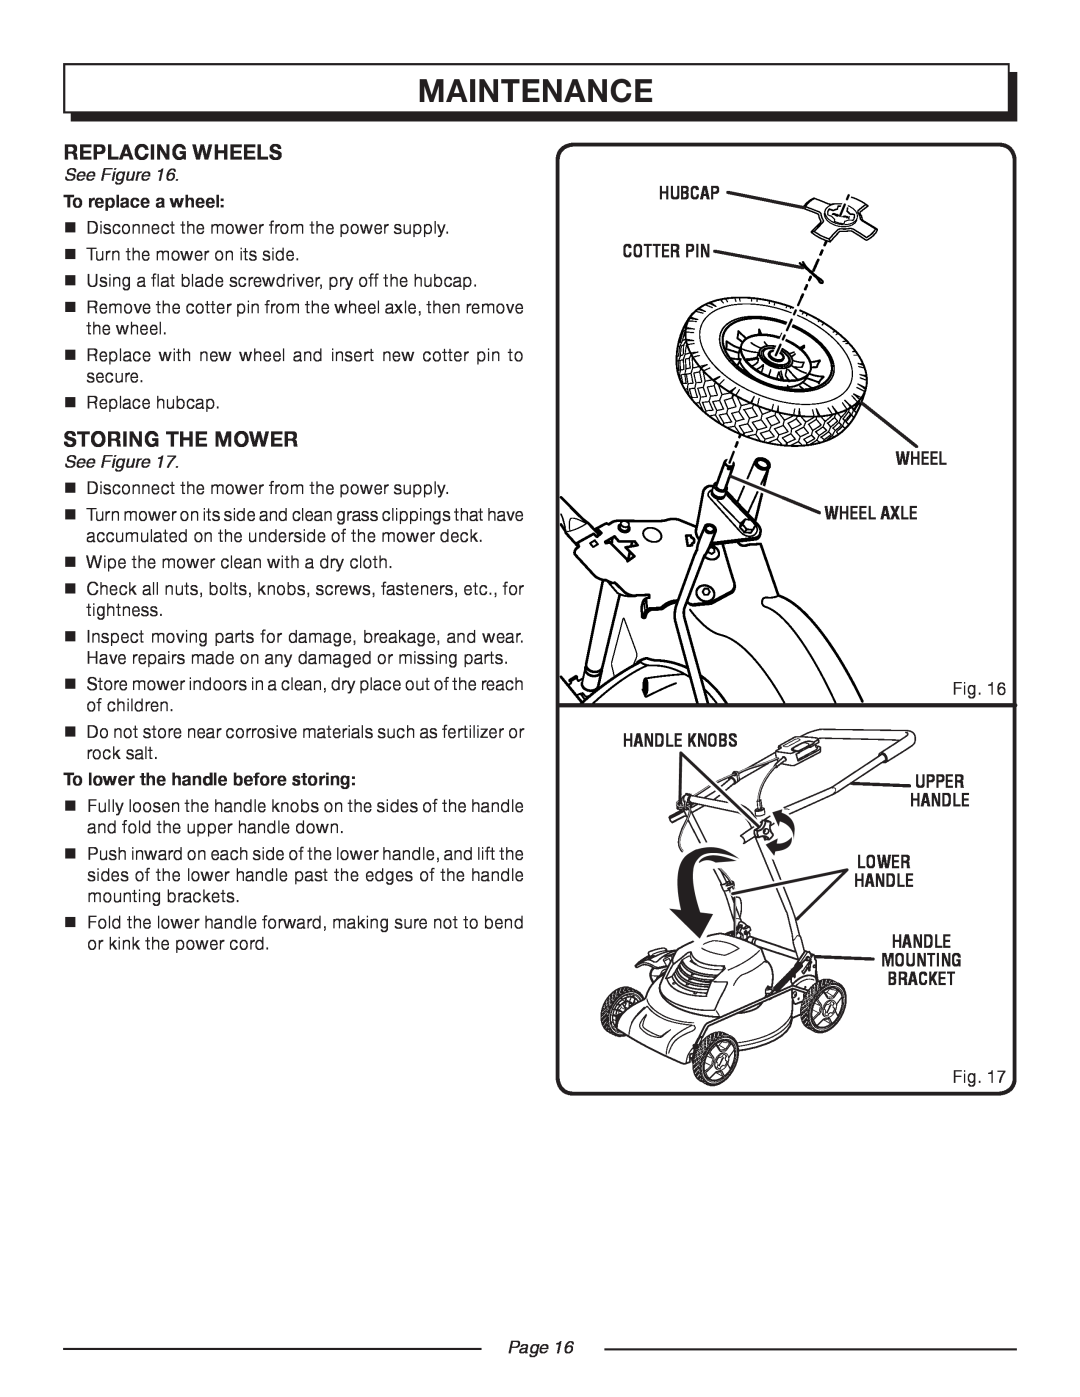 Homelite UT13118, UT13120 manual Replacing Wheels, Storing The Mower, Maintenance, See Figure, To replace a wheel, Page 